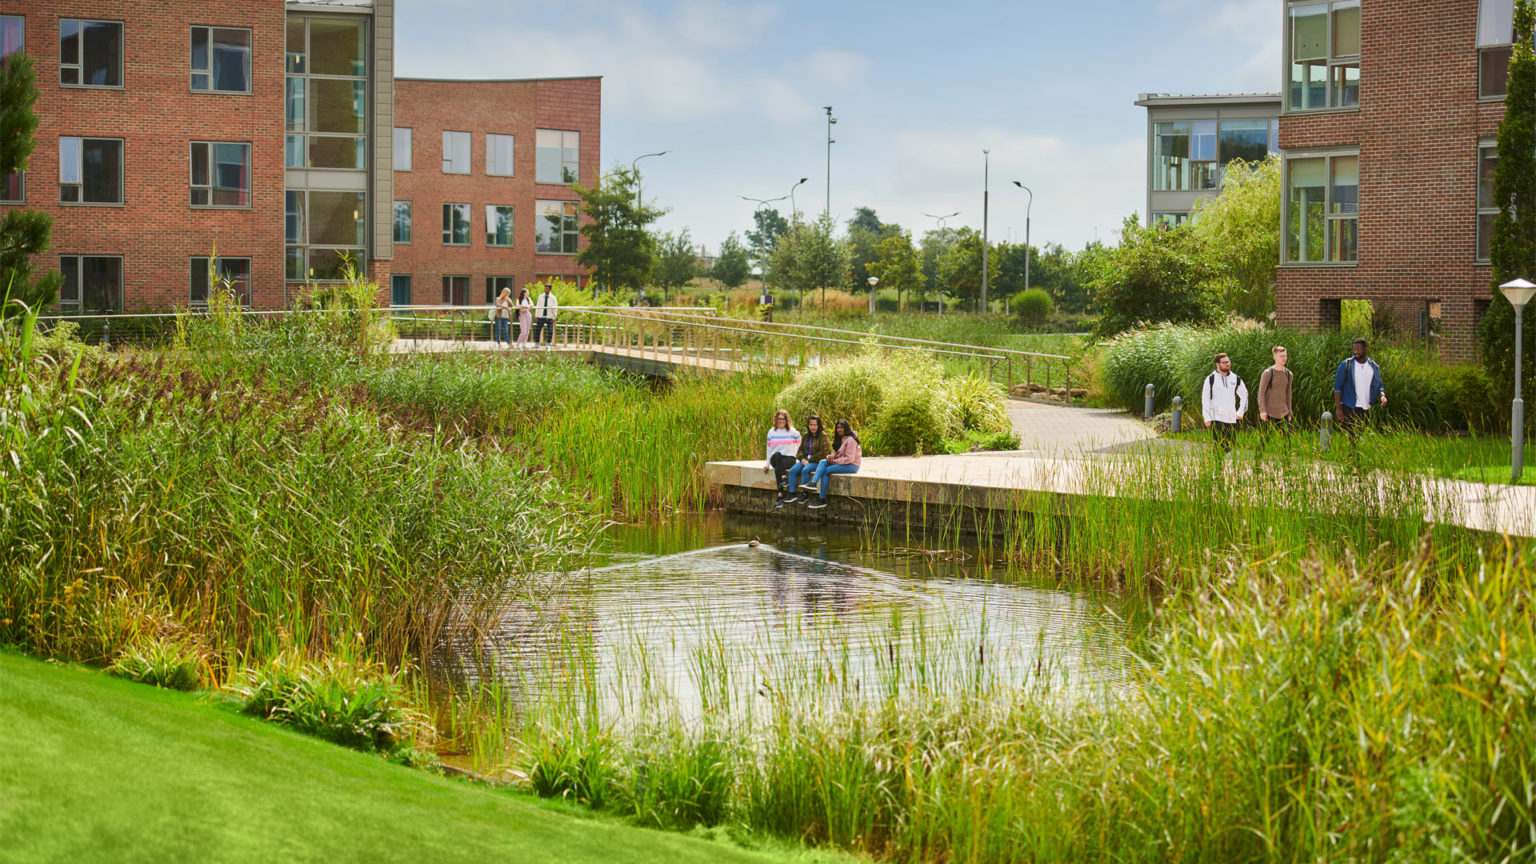 Edge Hill ranked gold in eco-friendly university league